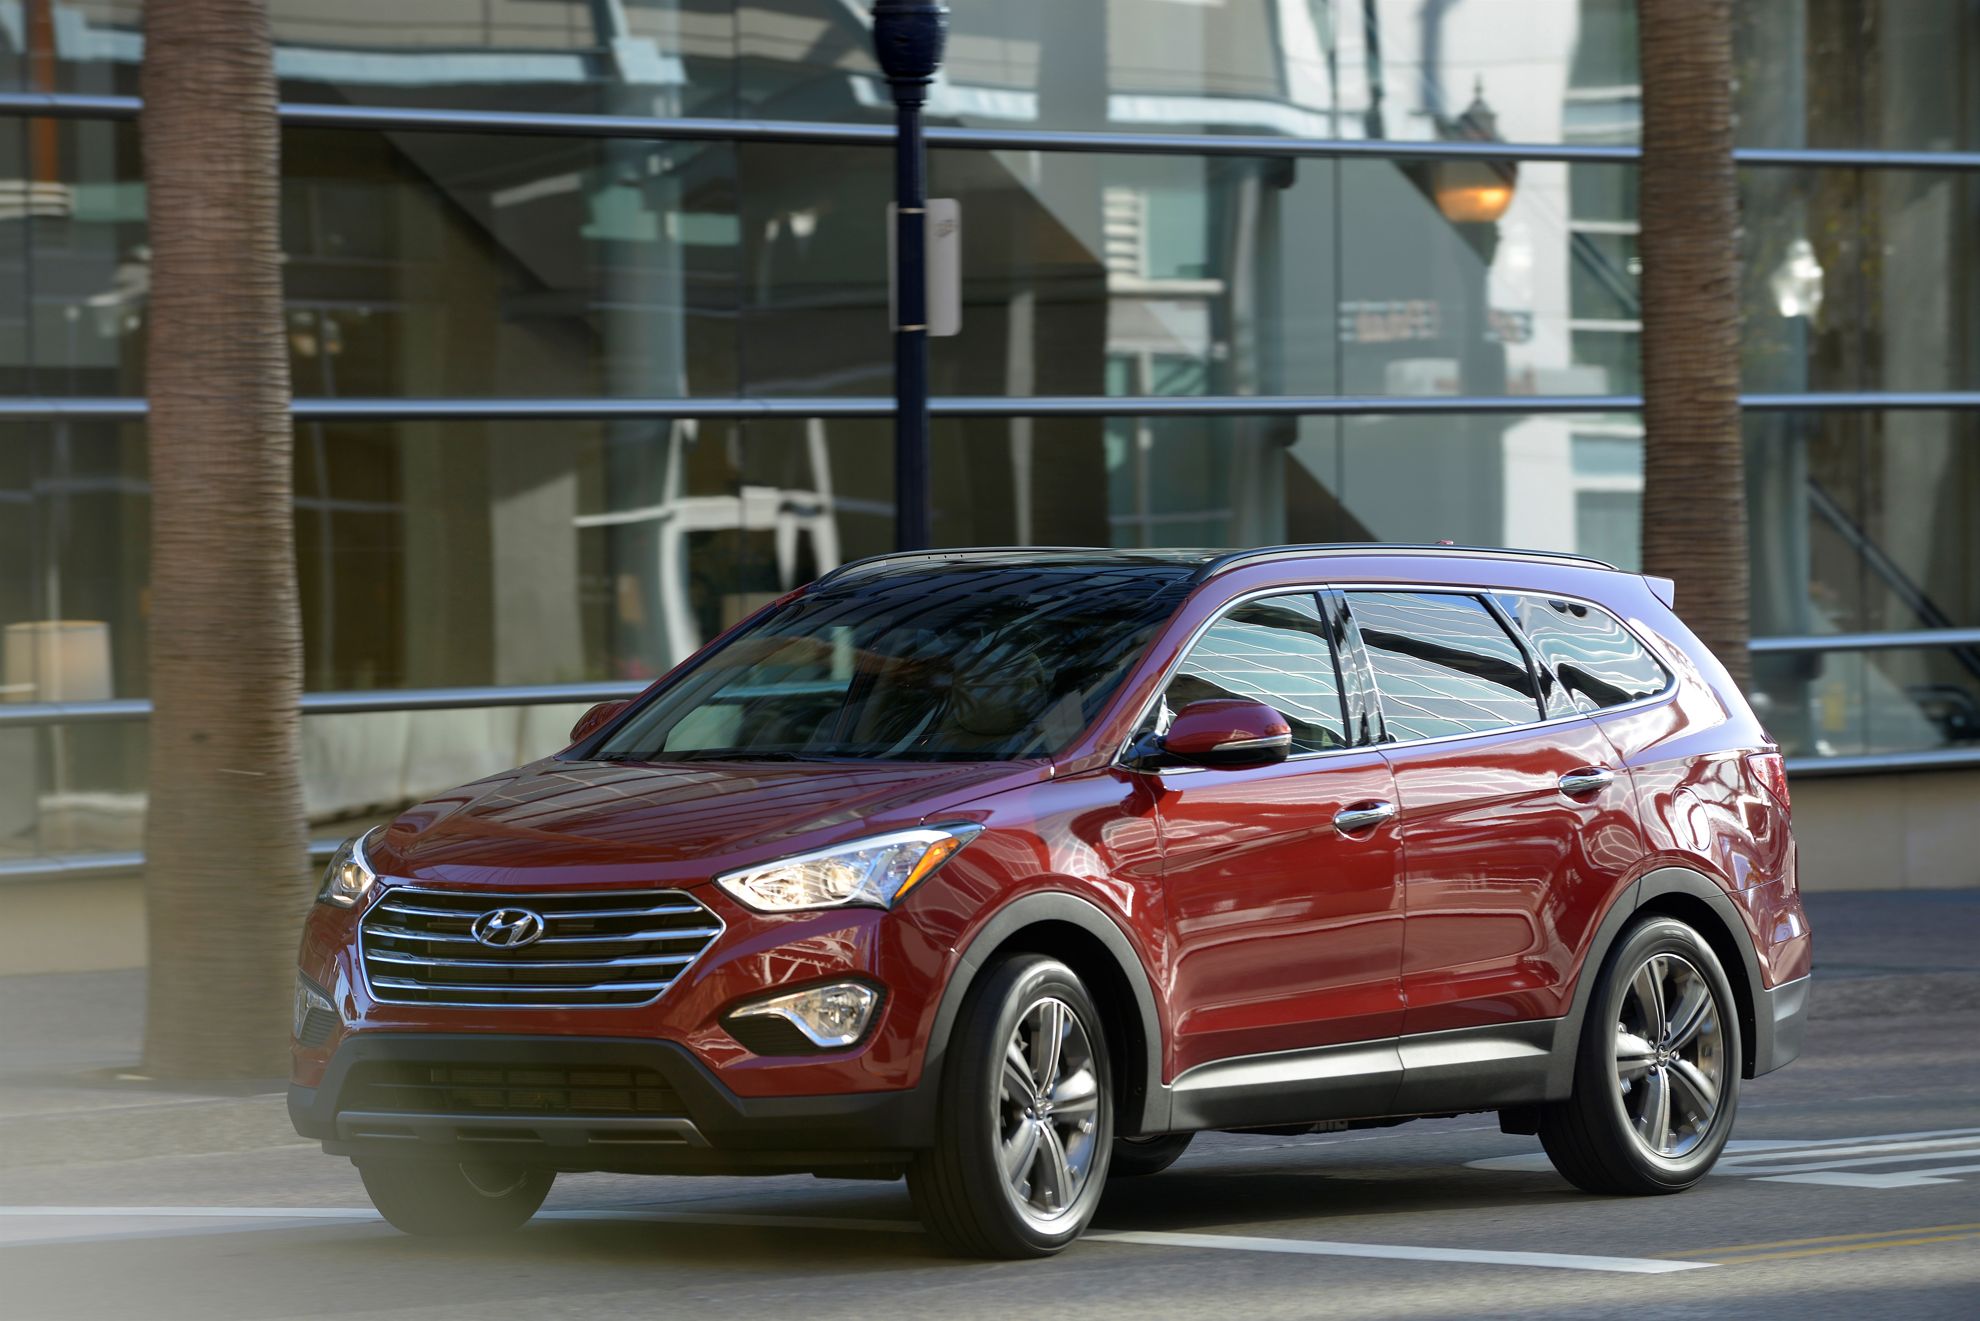 HYUNDAI SANTA FE NAMED A BEST CAR FOR THE MONEY BY U.S. NEWS & WORLD REPORT